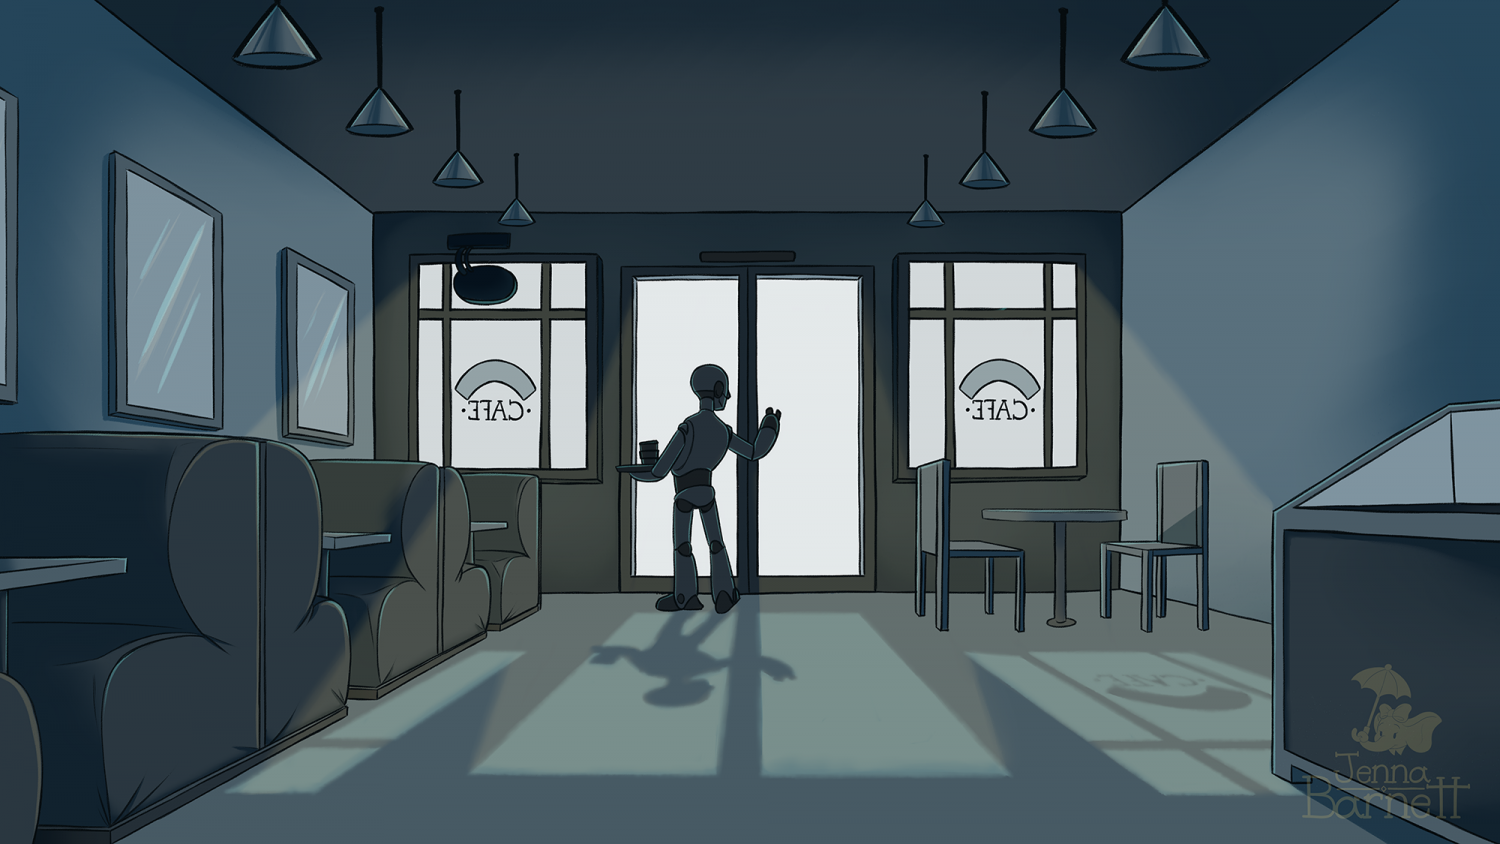 A key frame board of a diner colored with cool blues and grays. Toward the center, an android is framed by the light of a clear doorway, looking outside.